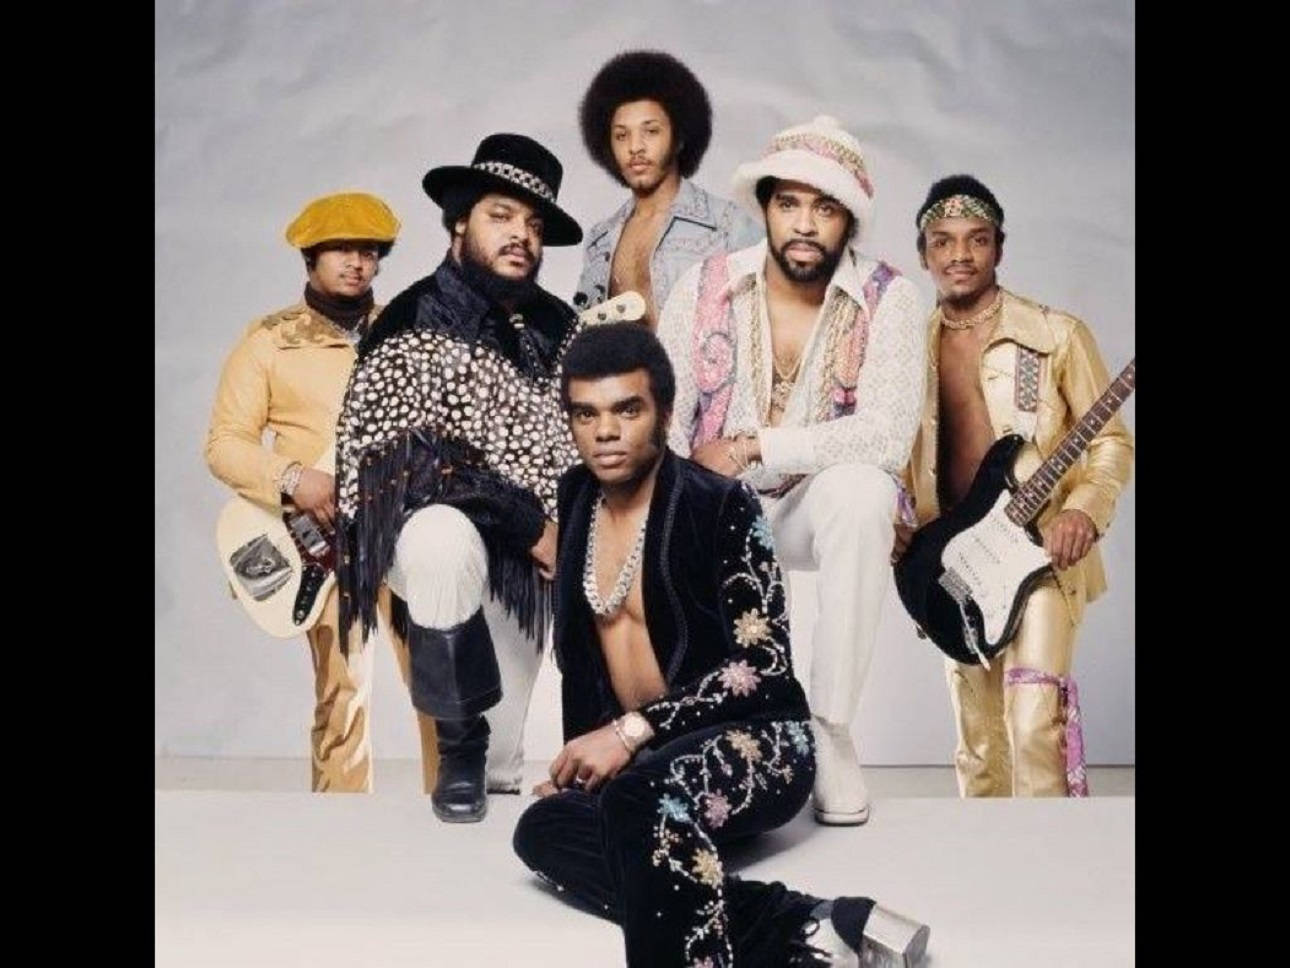 Download The Essential Isley Brothers Album Wallpaper | Wallpapers.com